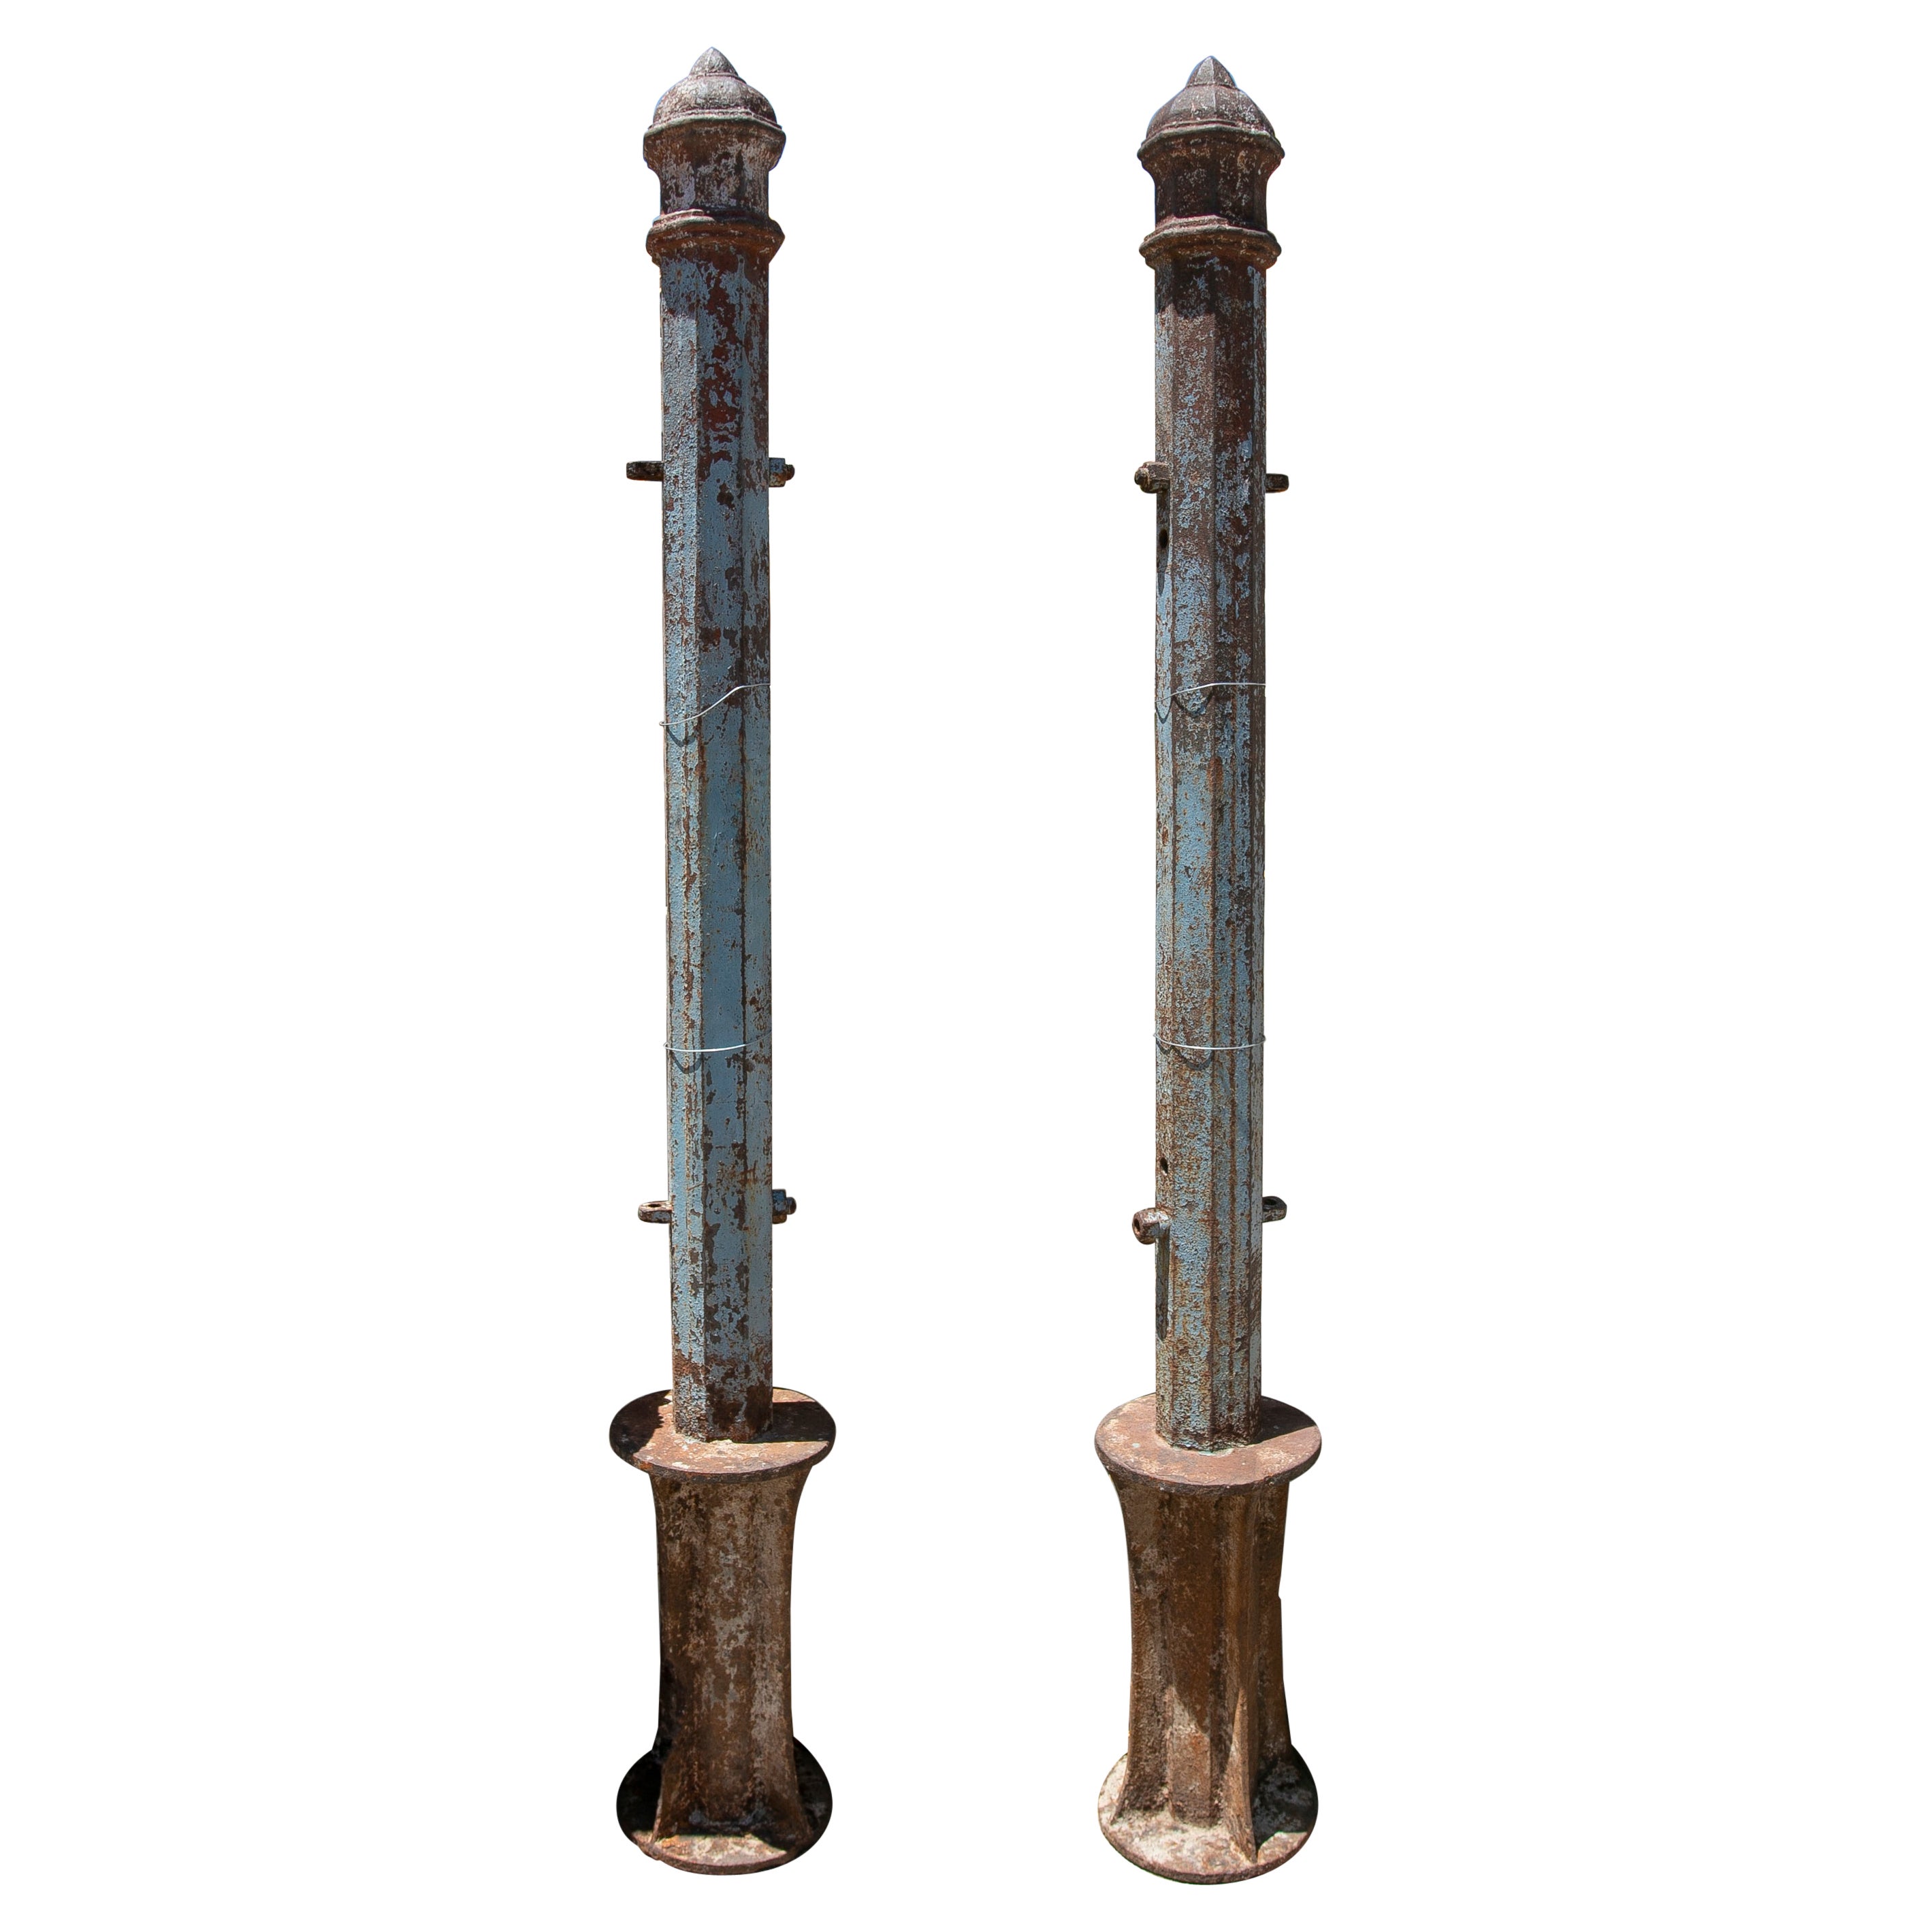 19th Century Pair of Decorative Cast Iron Columns with their Original Painting